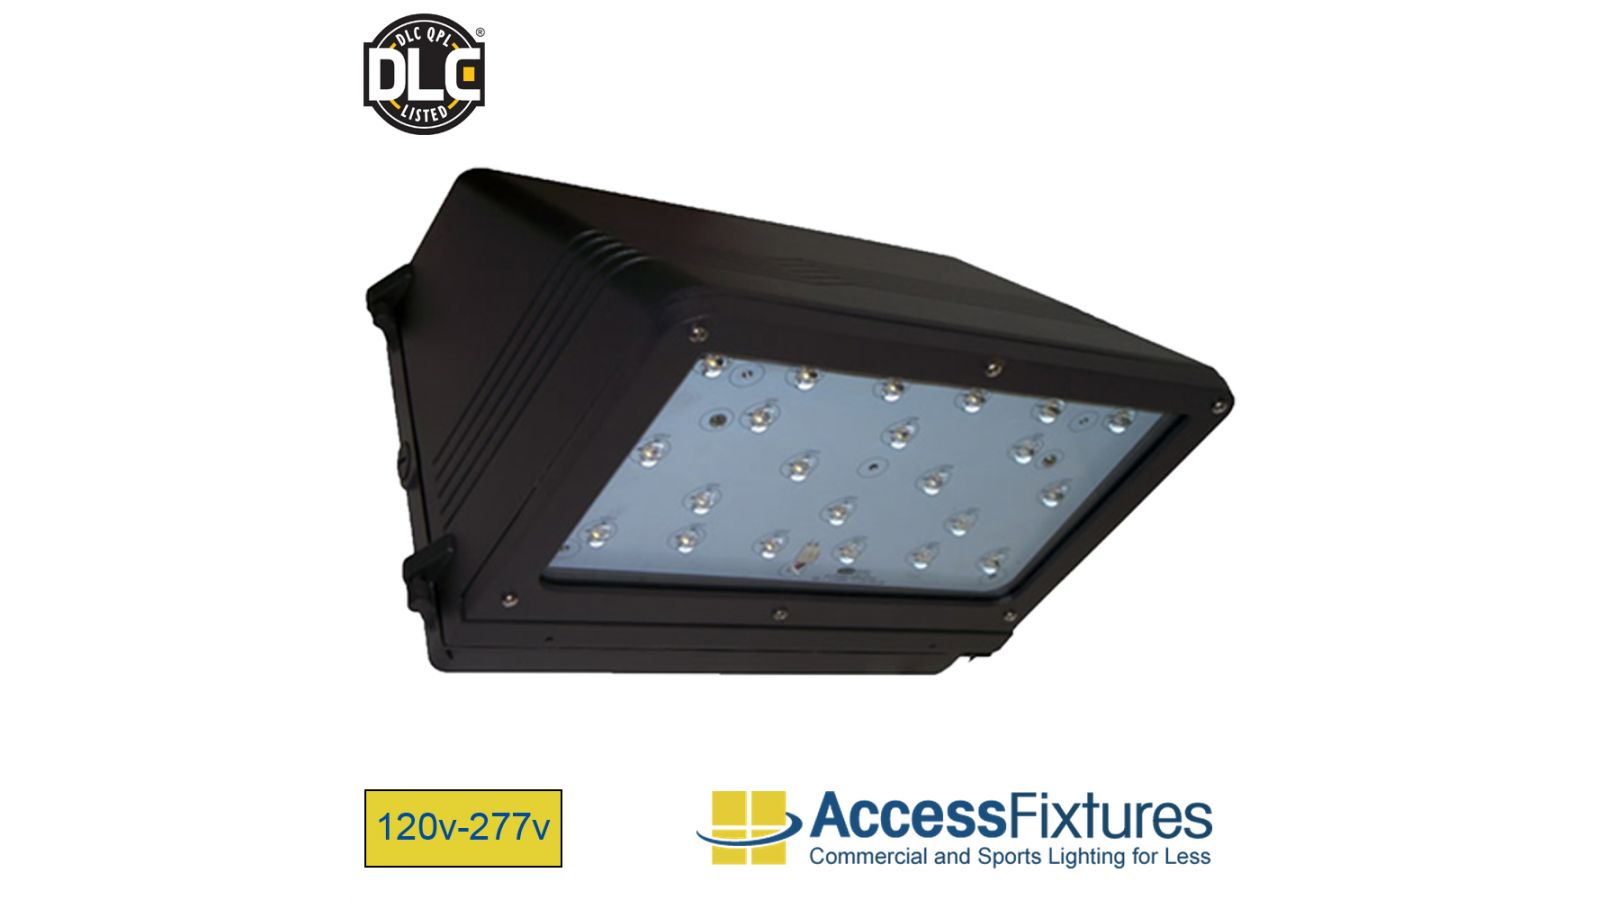 HEZE 43w LED Wall Pack 120-277v, 100w HID EQV, L70@213K Hrs EXTREME LIFE